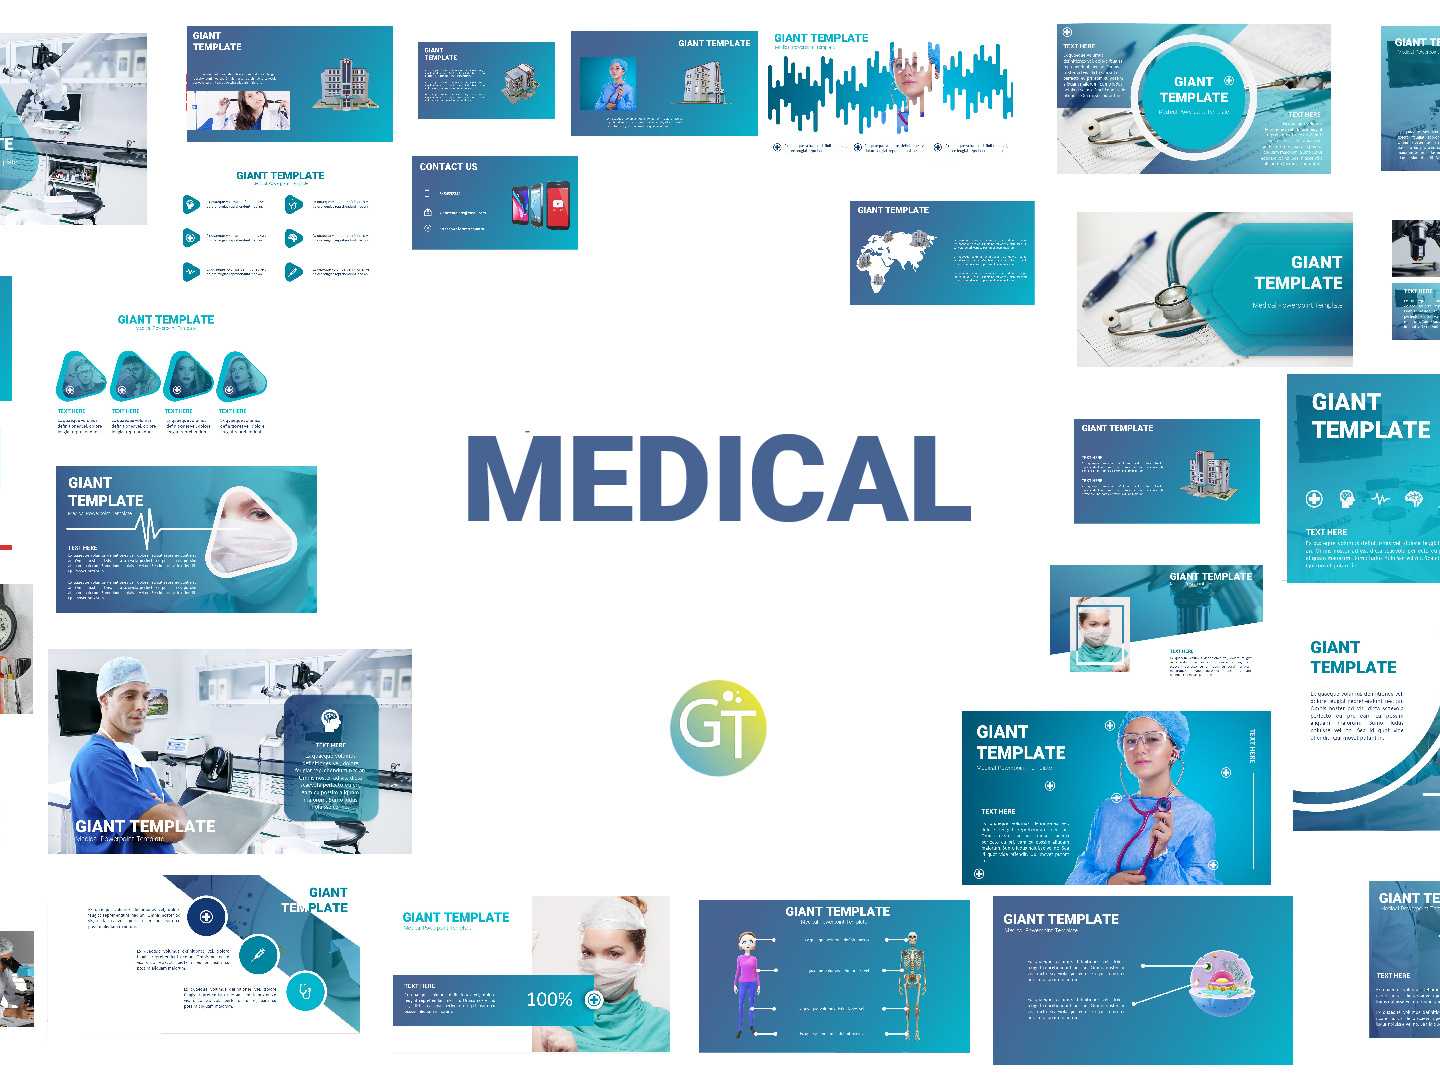 Medical Powerpoint Templates Free Downloadgiant Template Within Powerpoint Animation Templates Free Download